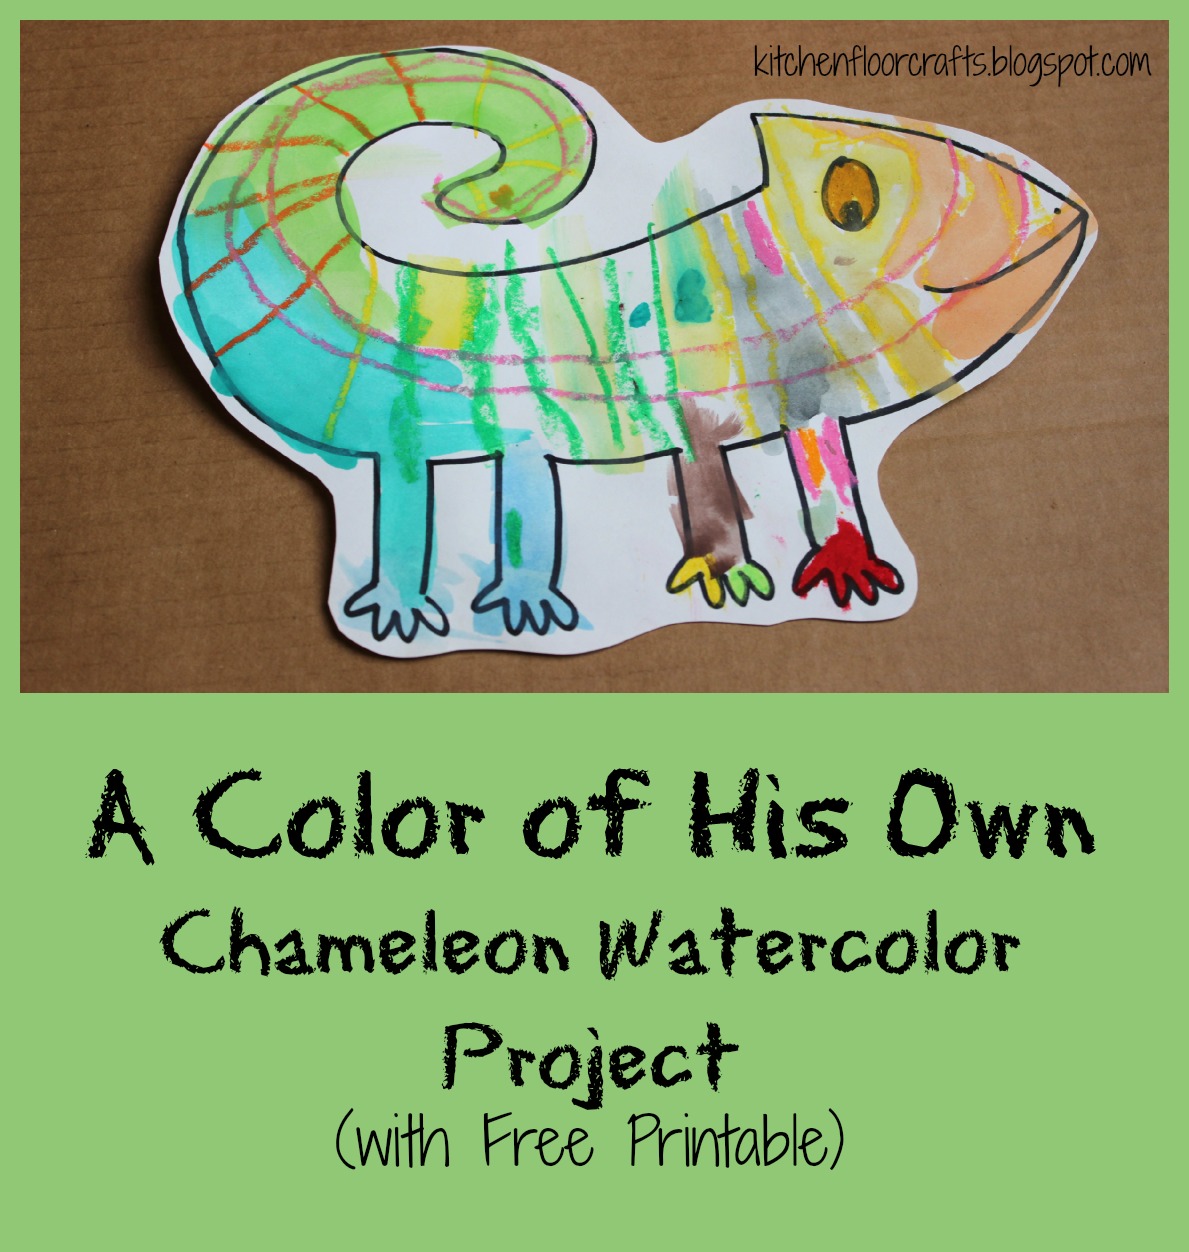 kitchen-floor-crafts-a-color-of-his-own-chameleon-watercolor-project